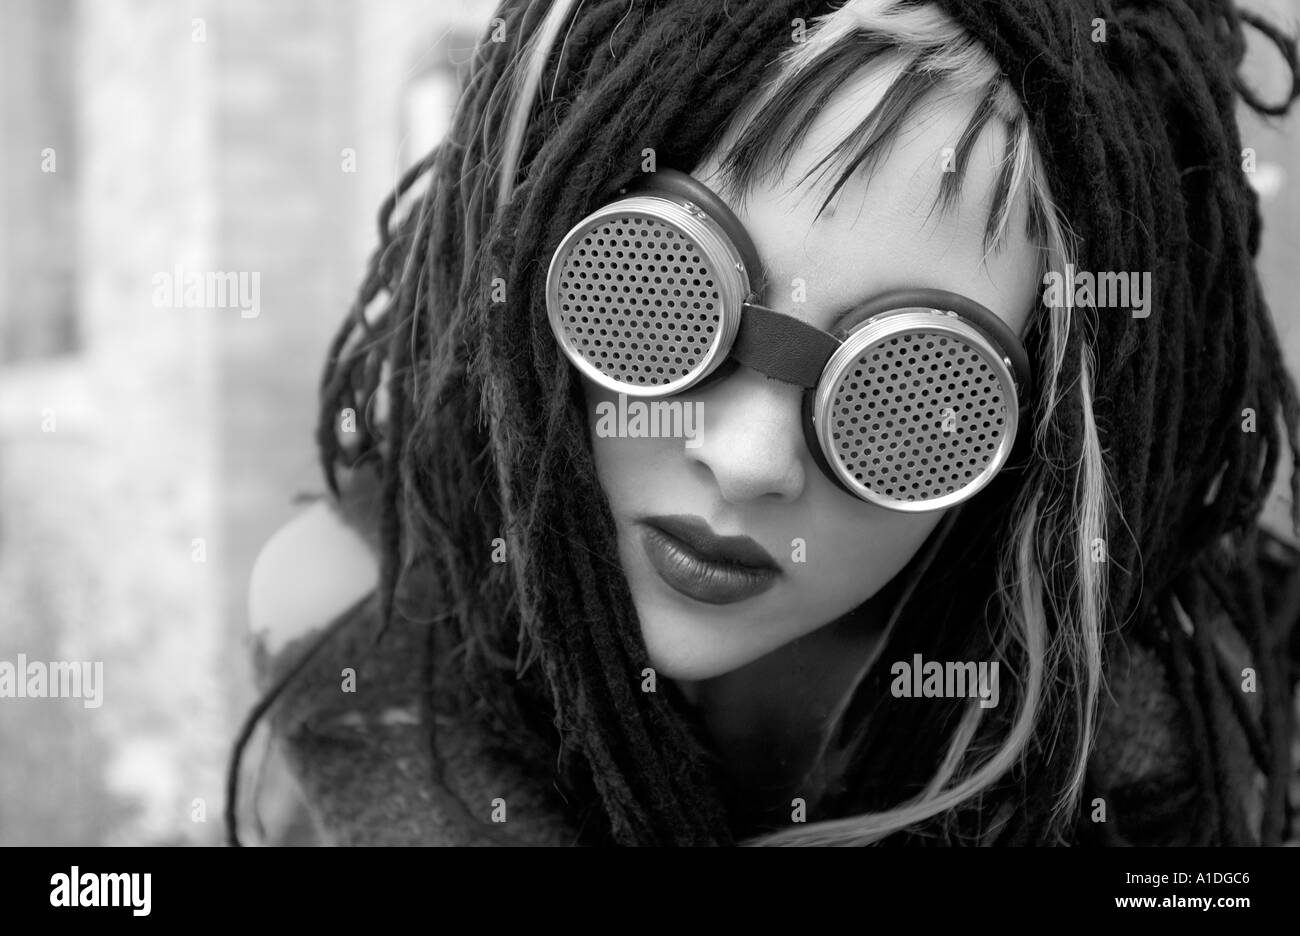 Portrait of goth girl wearing goggles Stock Photo